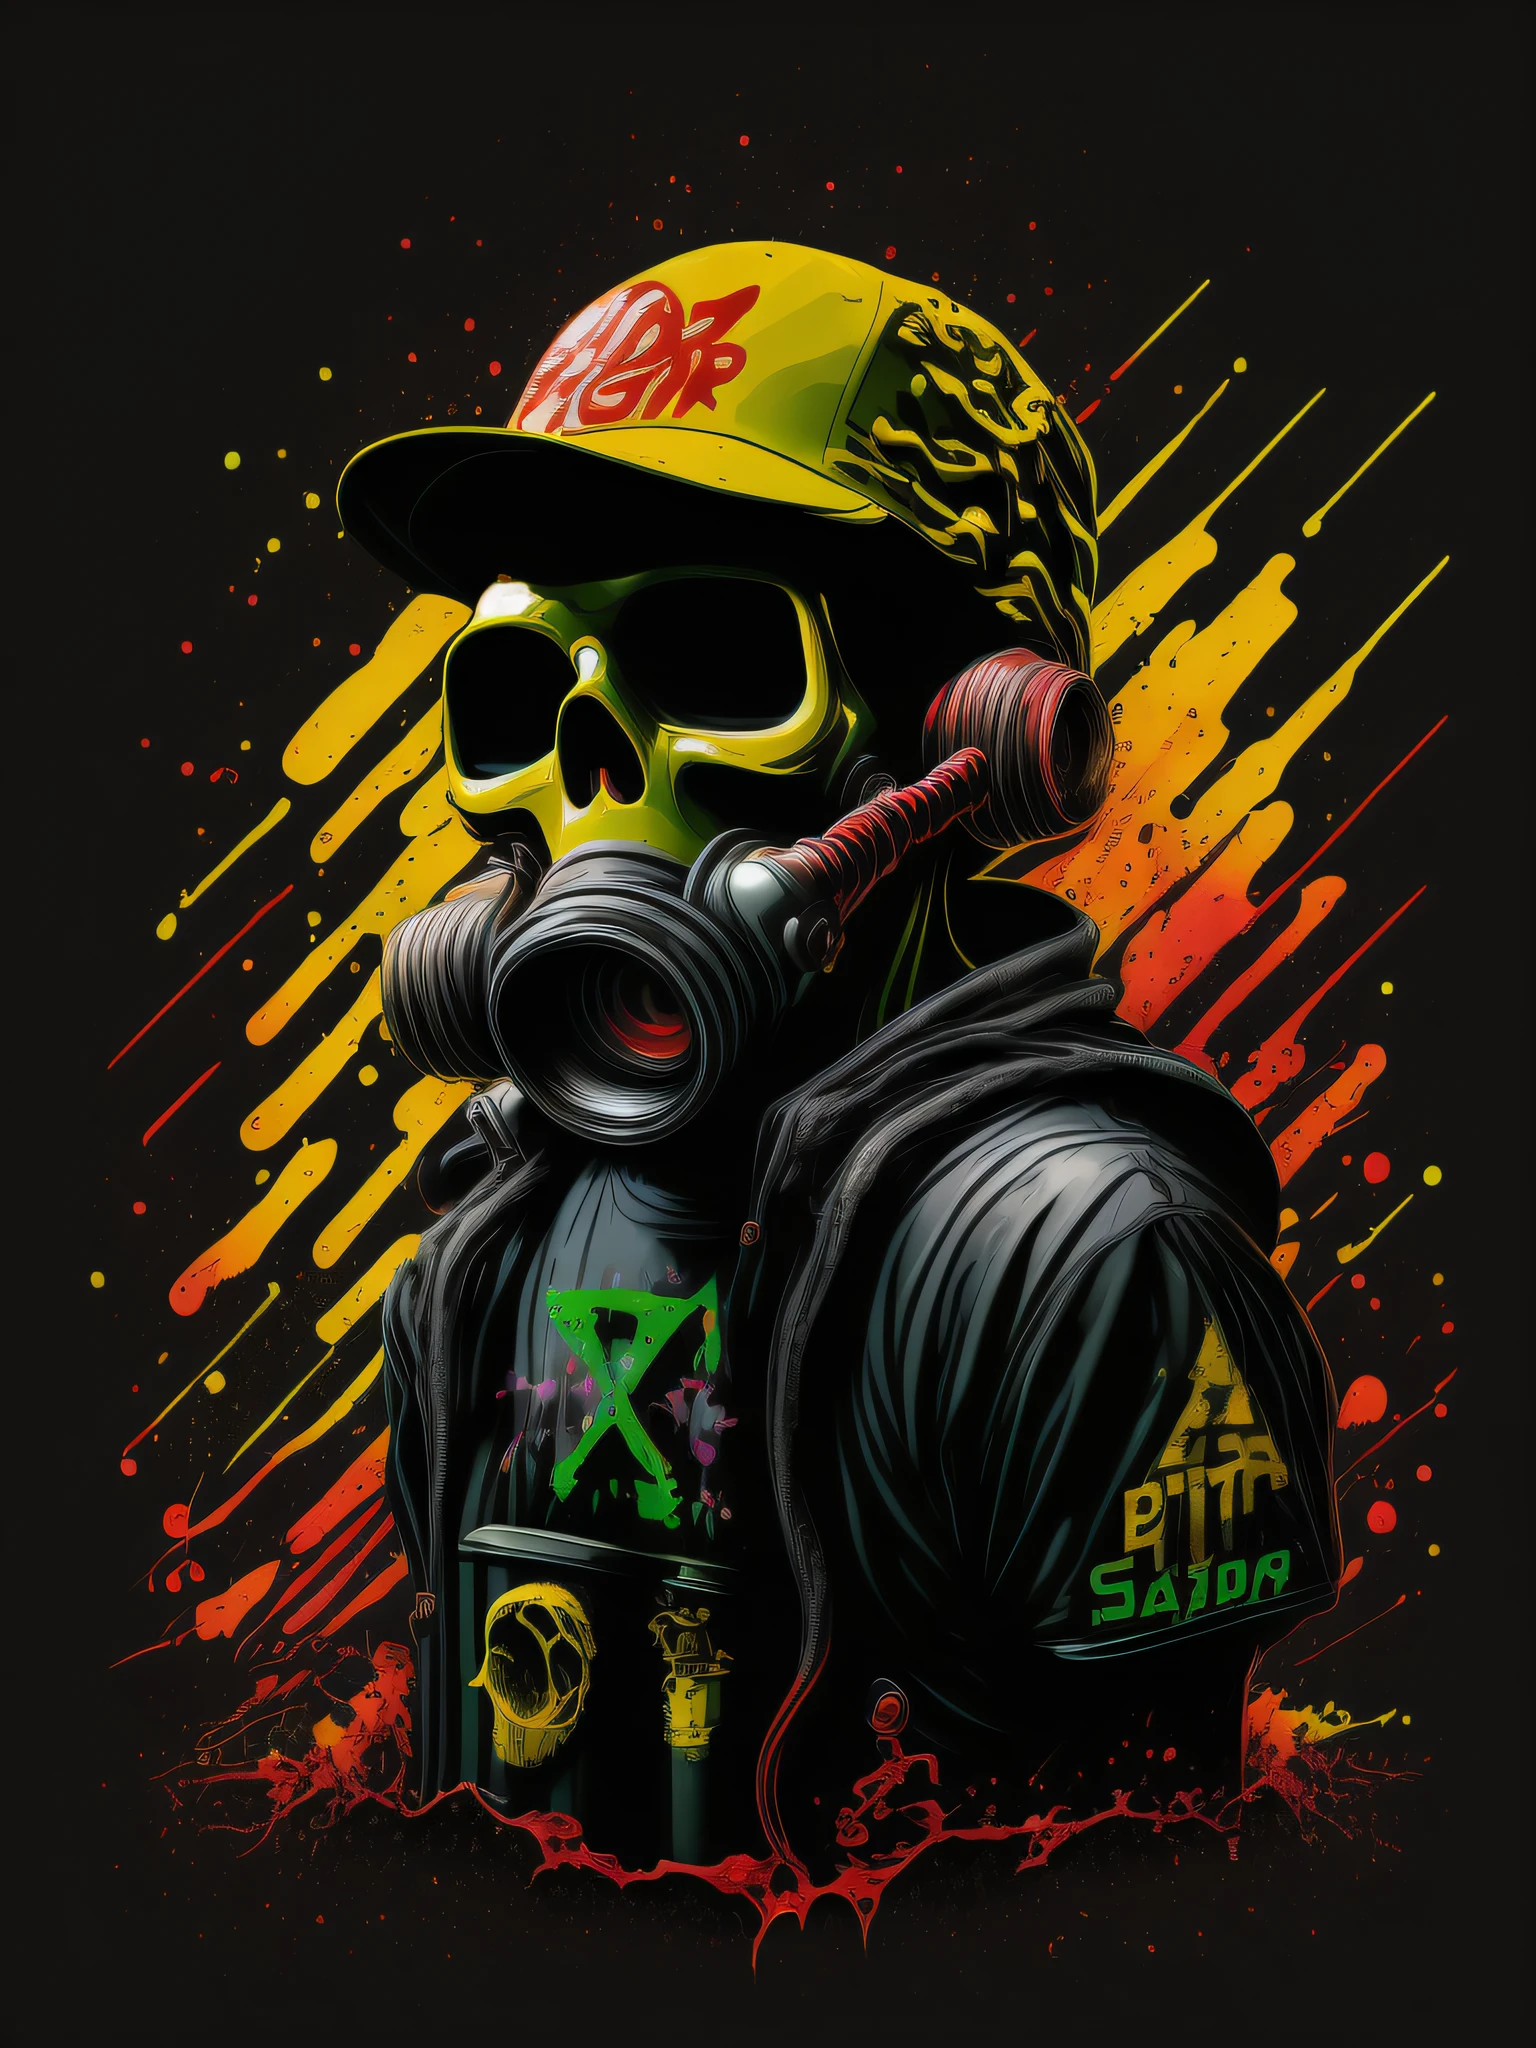 pixador skeleton with gas mask and cap, splash, spray, tracks, 80's, vector image, t-shirt design, isolated, black background, illustration, use only yellow and red green colors, with letters "TDR" highlighted